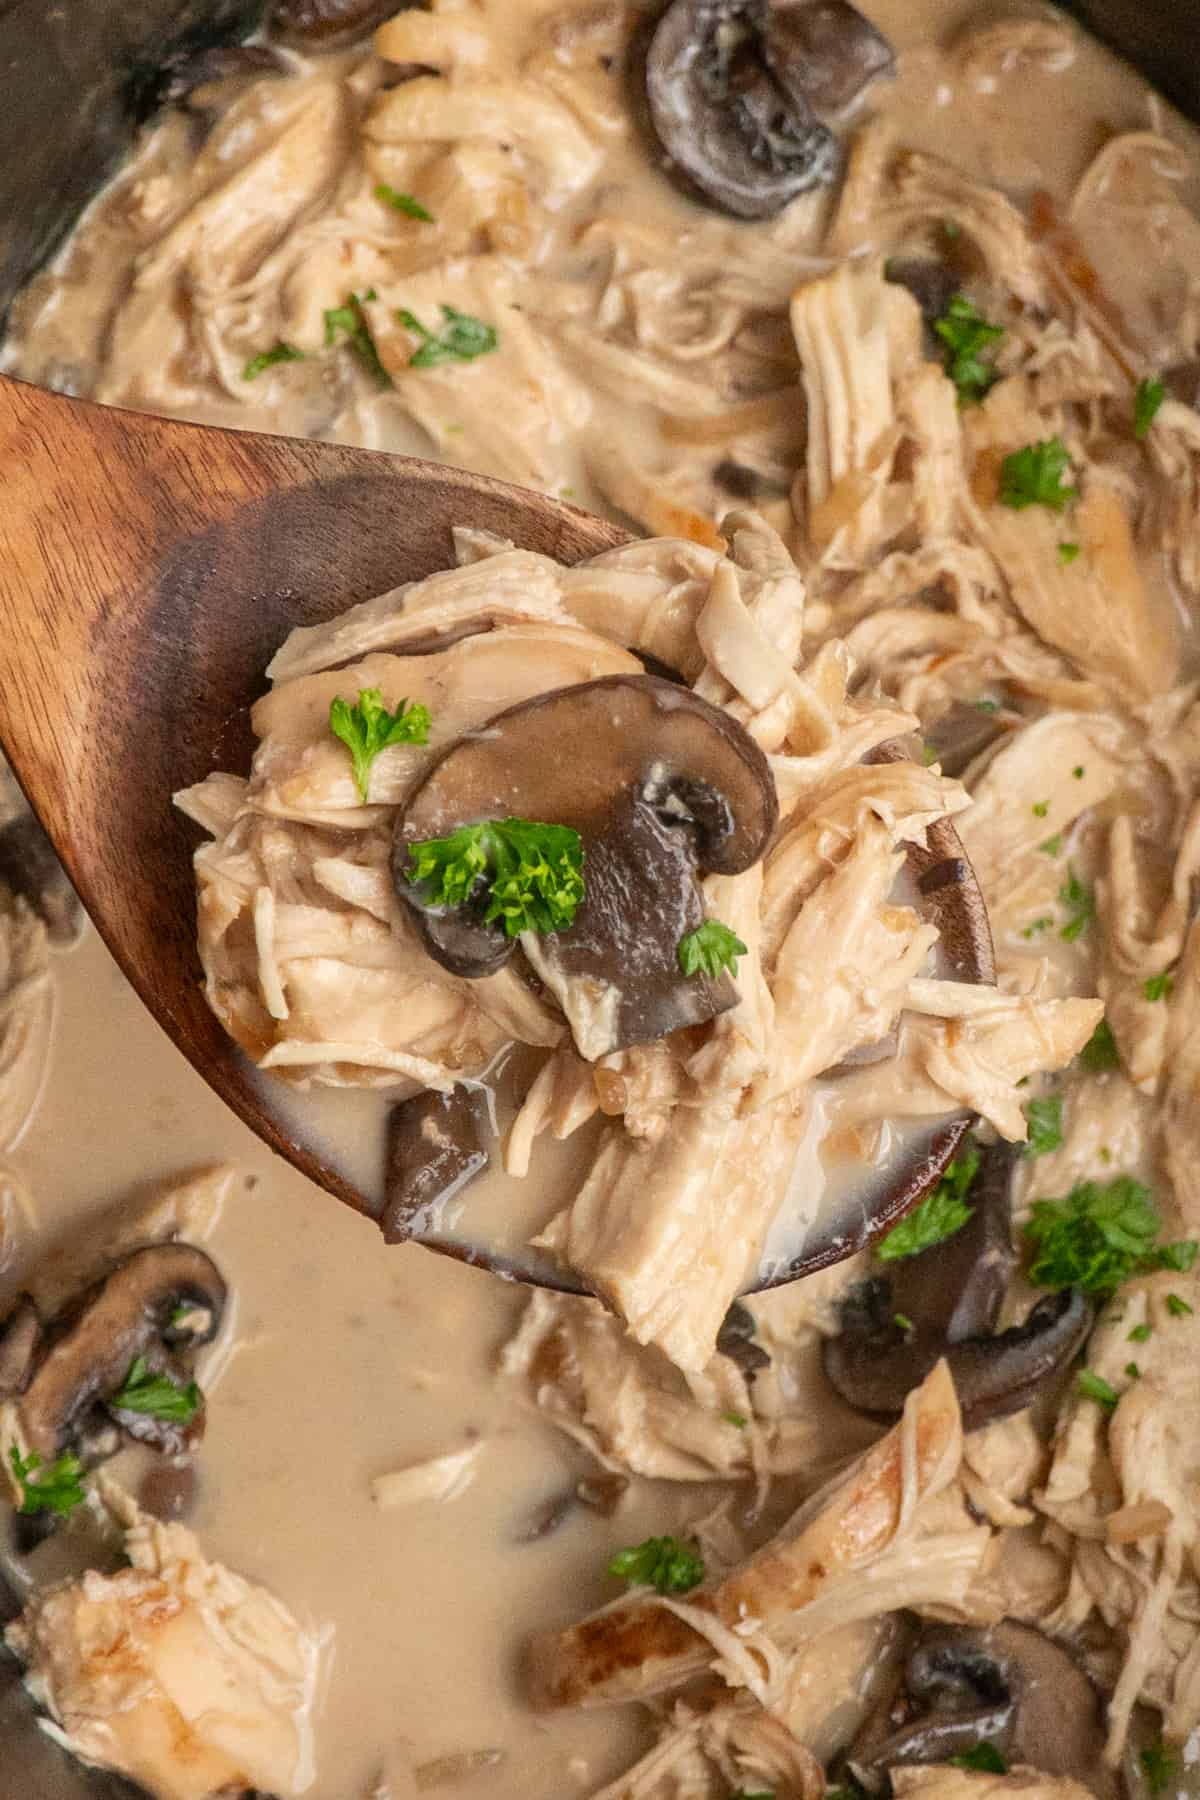 A wooden spoon holding shredded chicken and sauce.